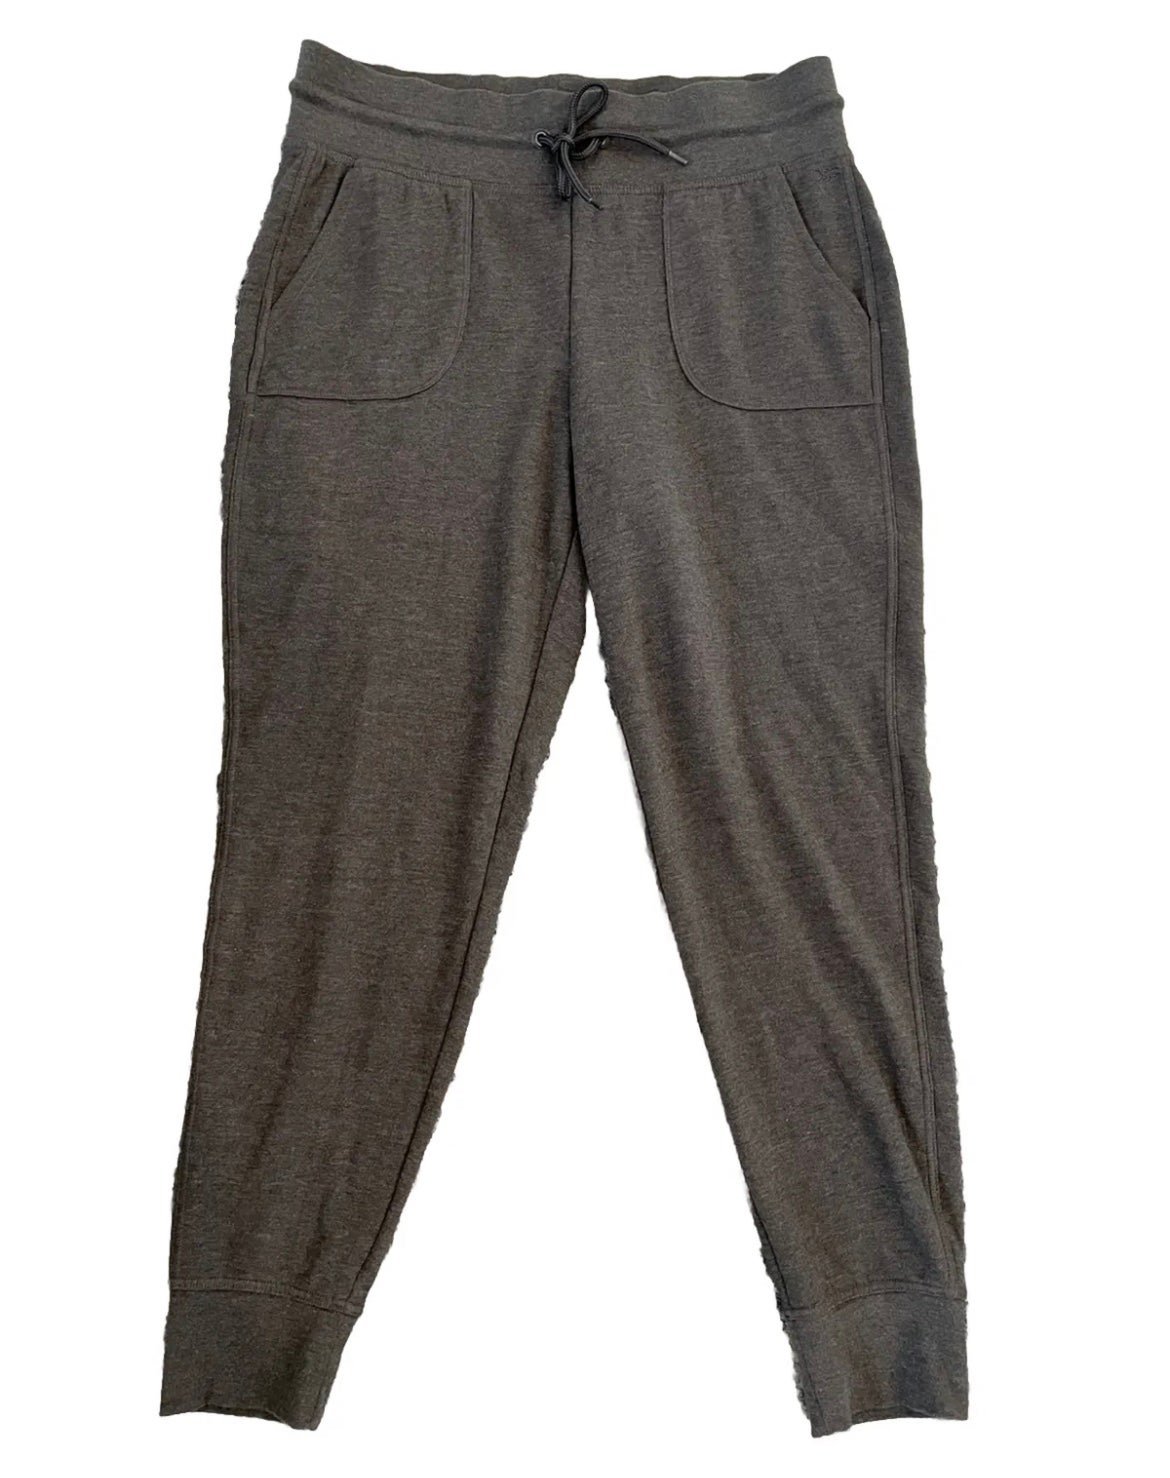 the Lowest price DSG Women’s Gray Joggers Size Large-Worn Once JLmDEPPmQ Low Price